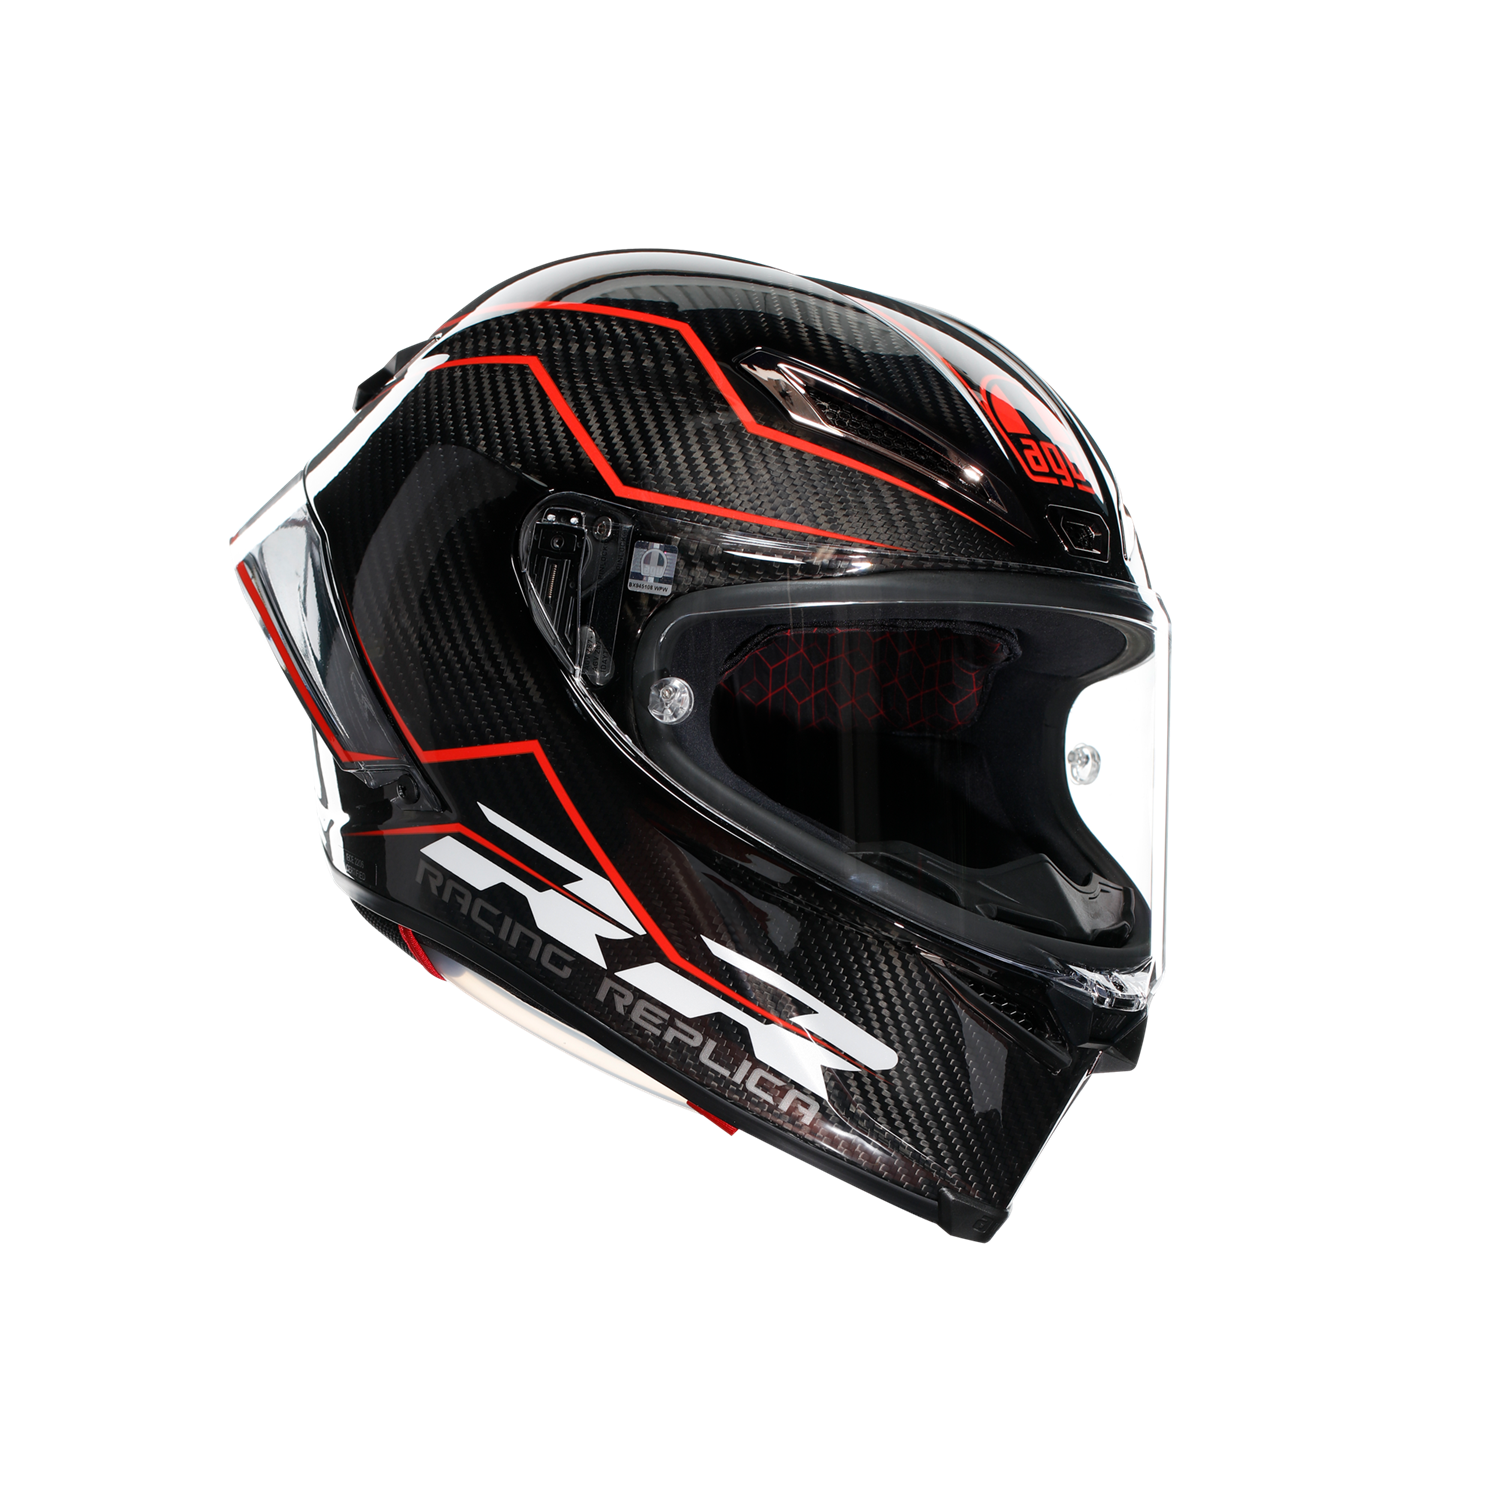 PISTA GP RR JIST Asian Fit 017-PERFORMANTE CARBON/RED | AGV ヘルメット